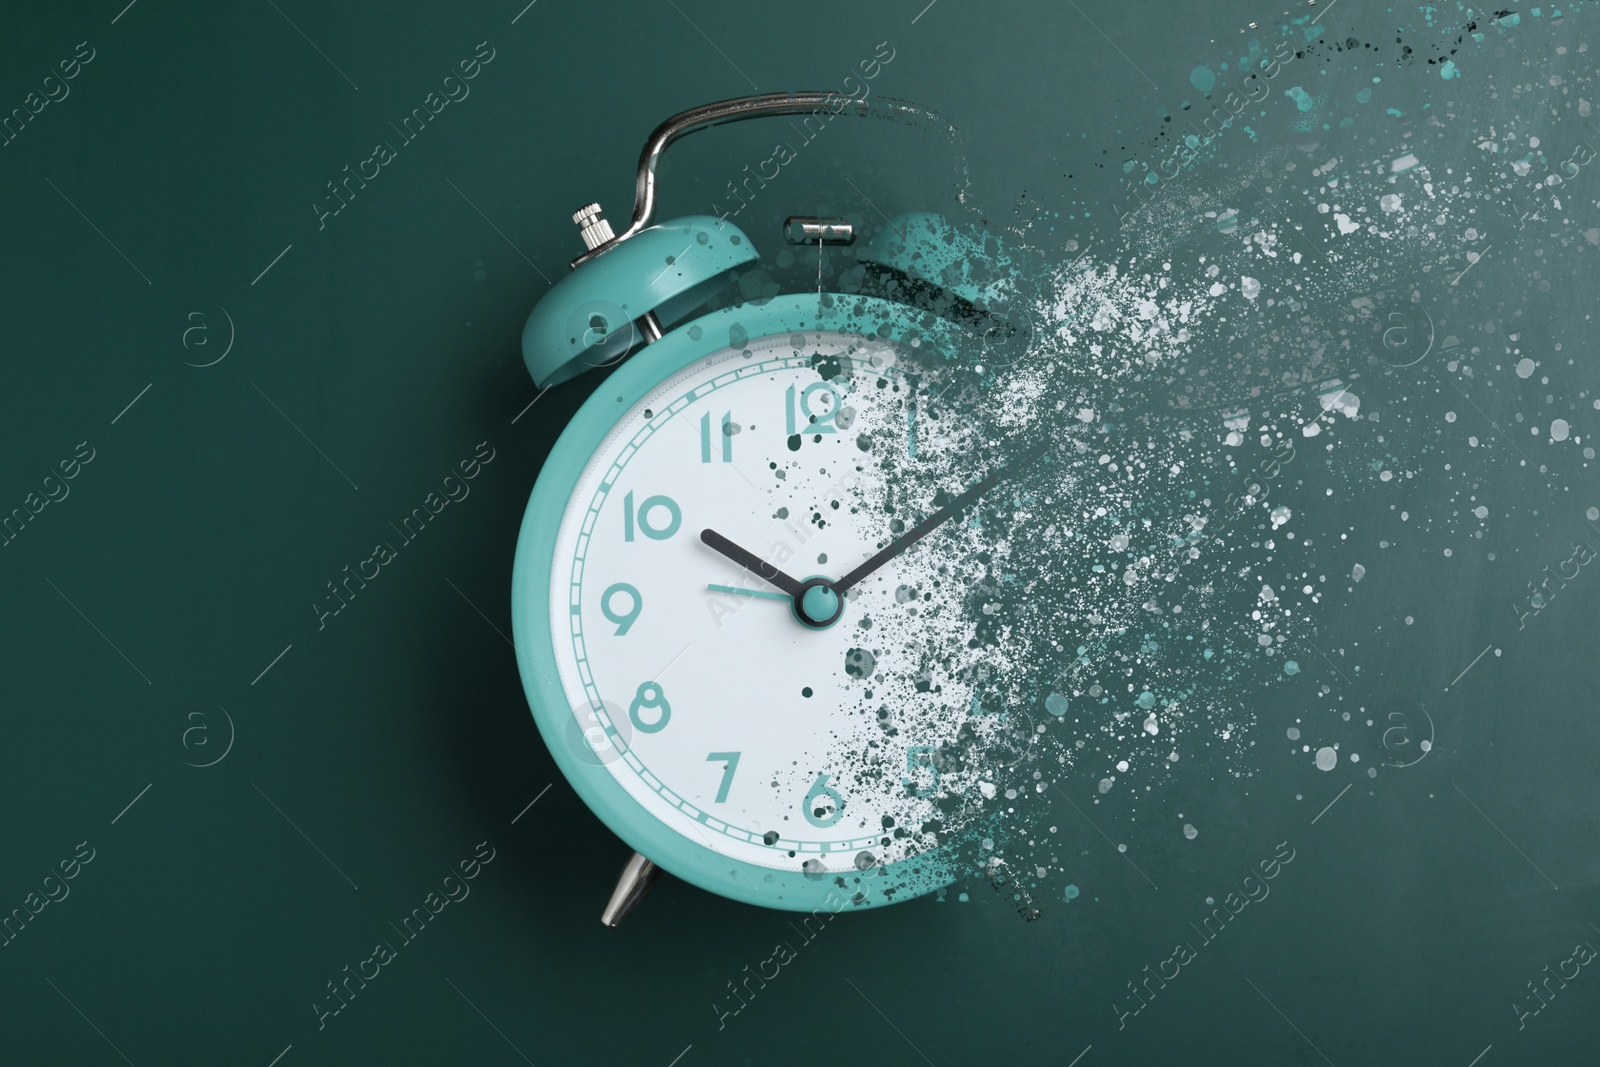 Image of Time is running out. Turquoise alarm clock vanishing on green background, top view